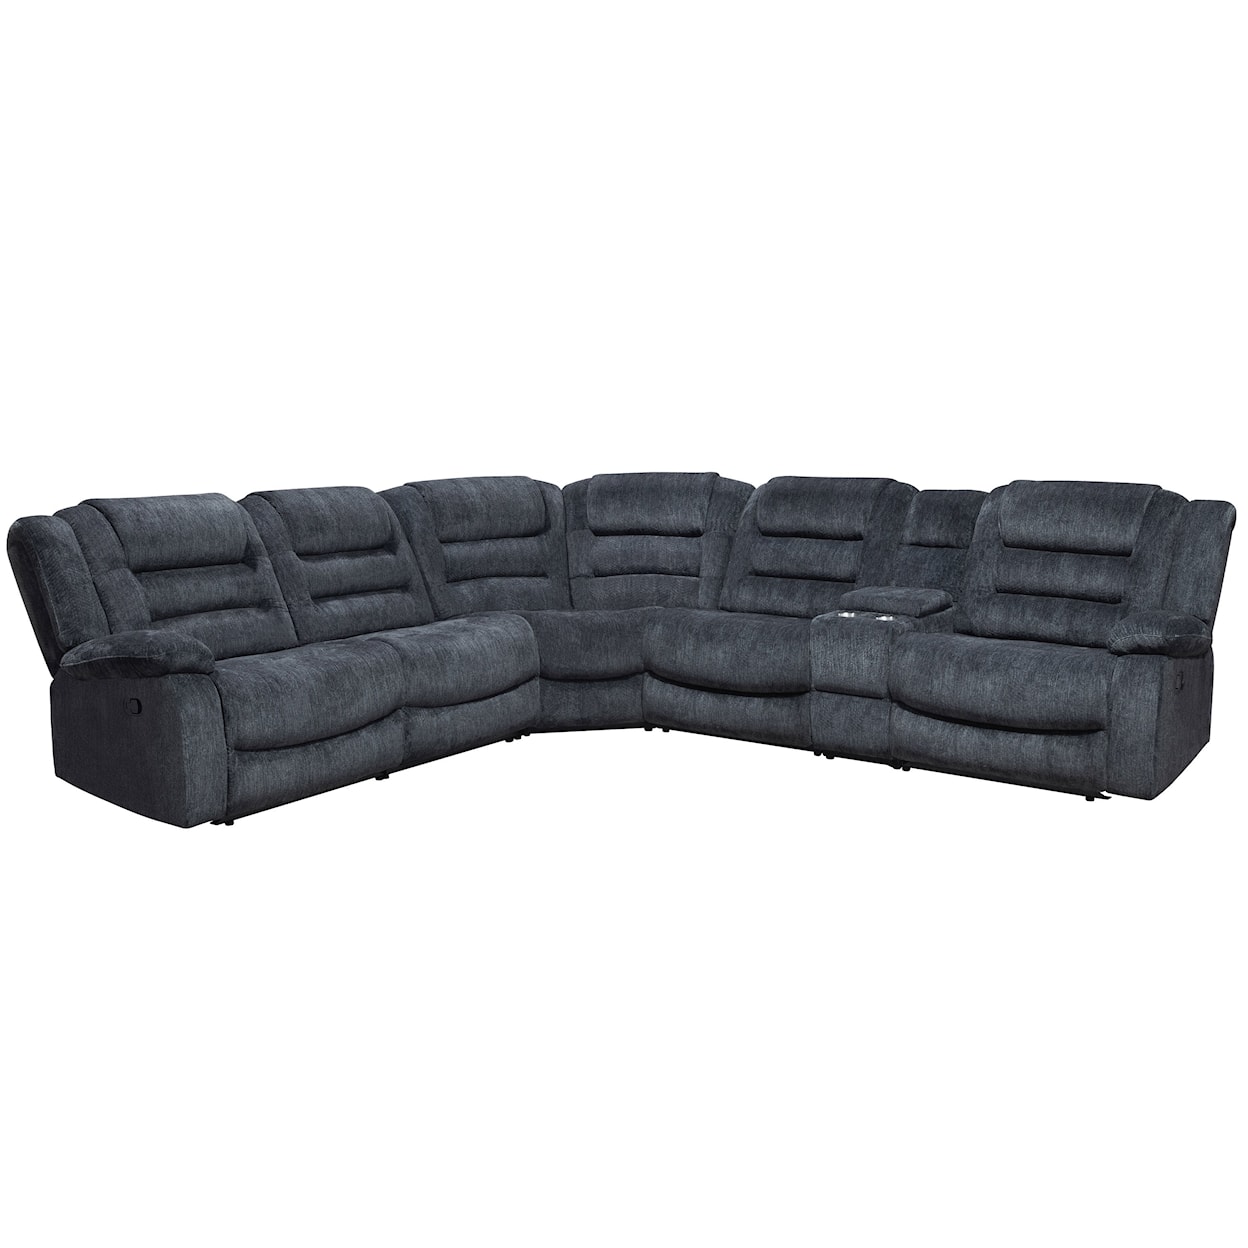 Paramount Living Bolton 6 Piece Reclining Sectional and Console